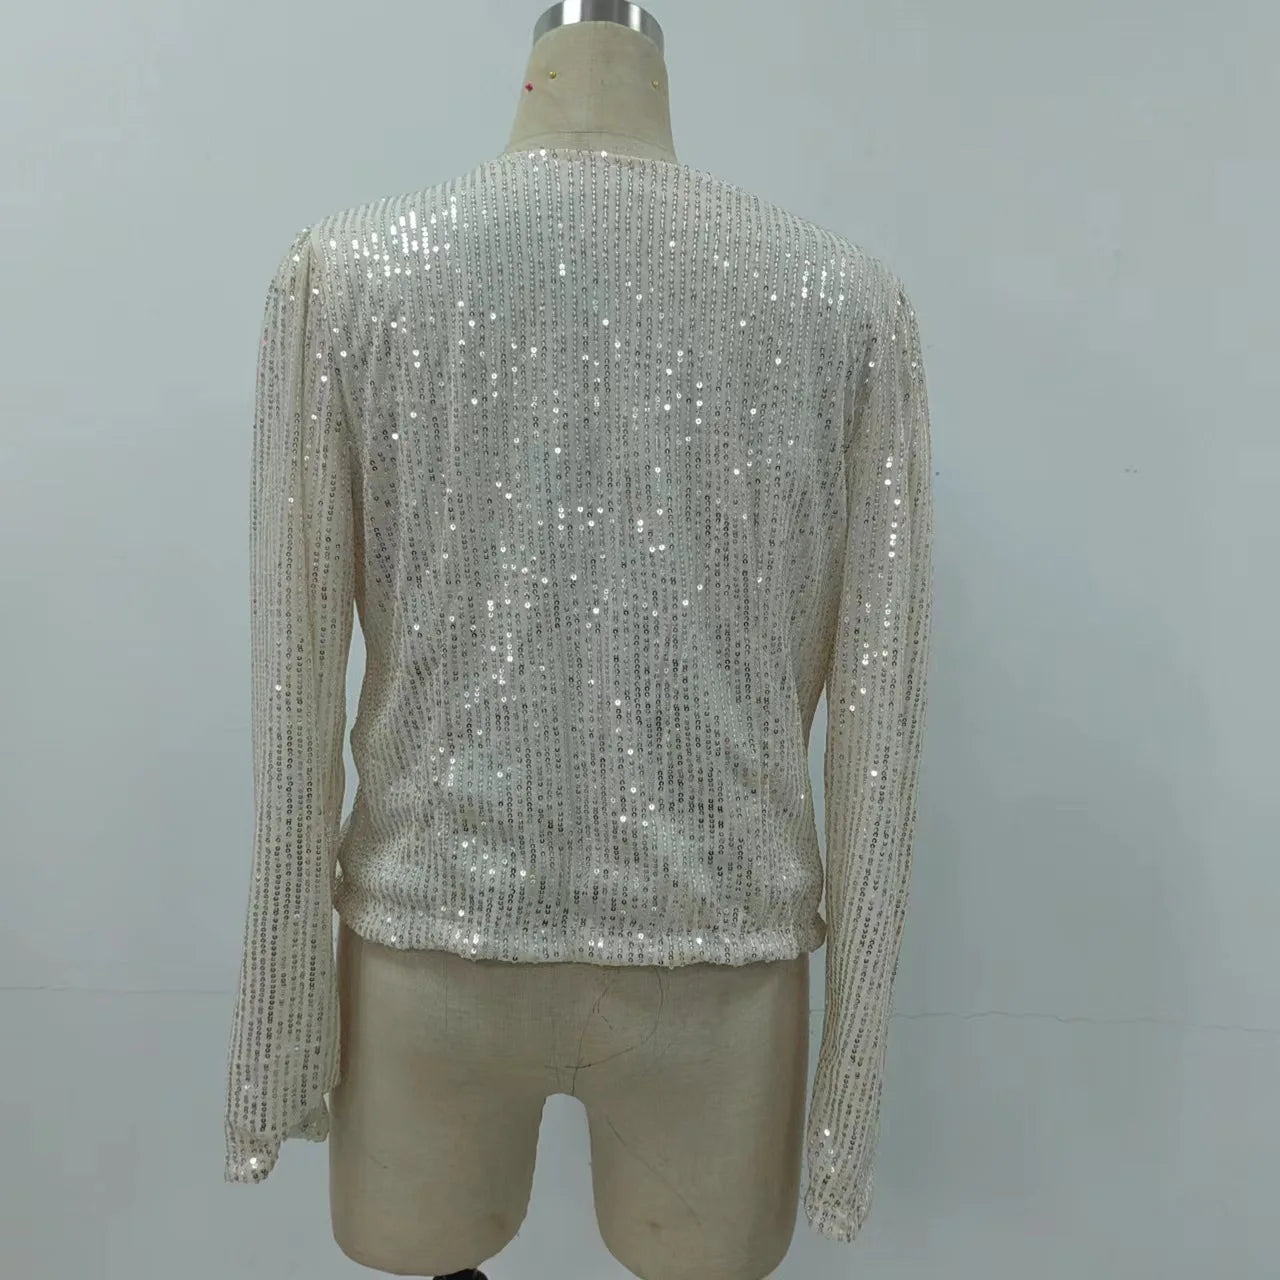 Long Sleeve Open Front Sequin Coat Women Casual Female Jacket Sequin Pearls Buttons Coat O-Neck Out Wear Ladies